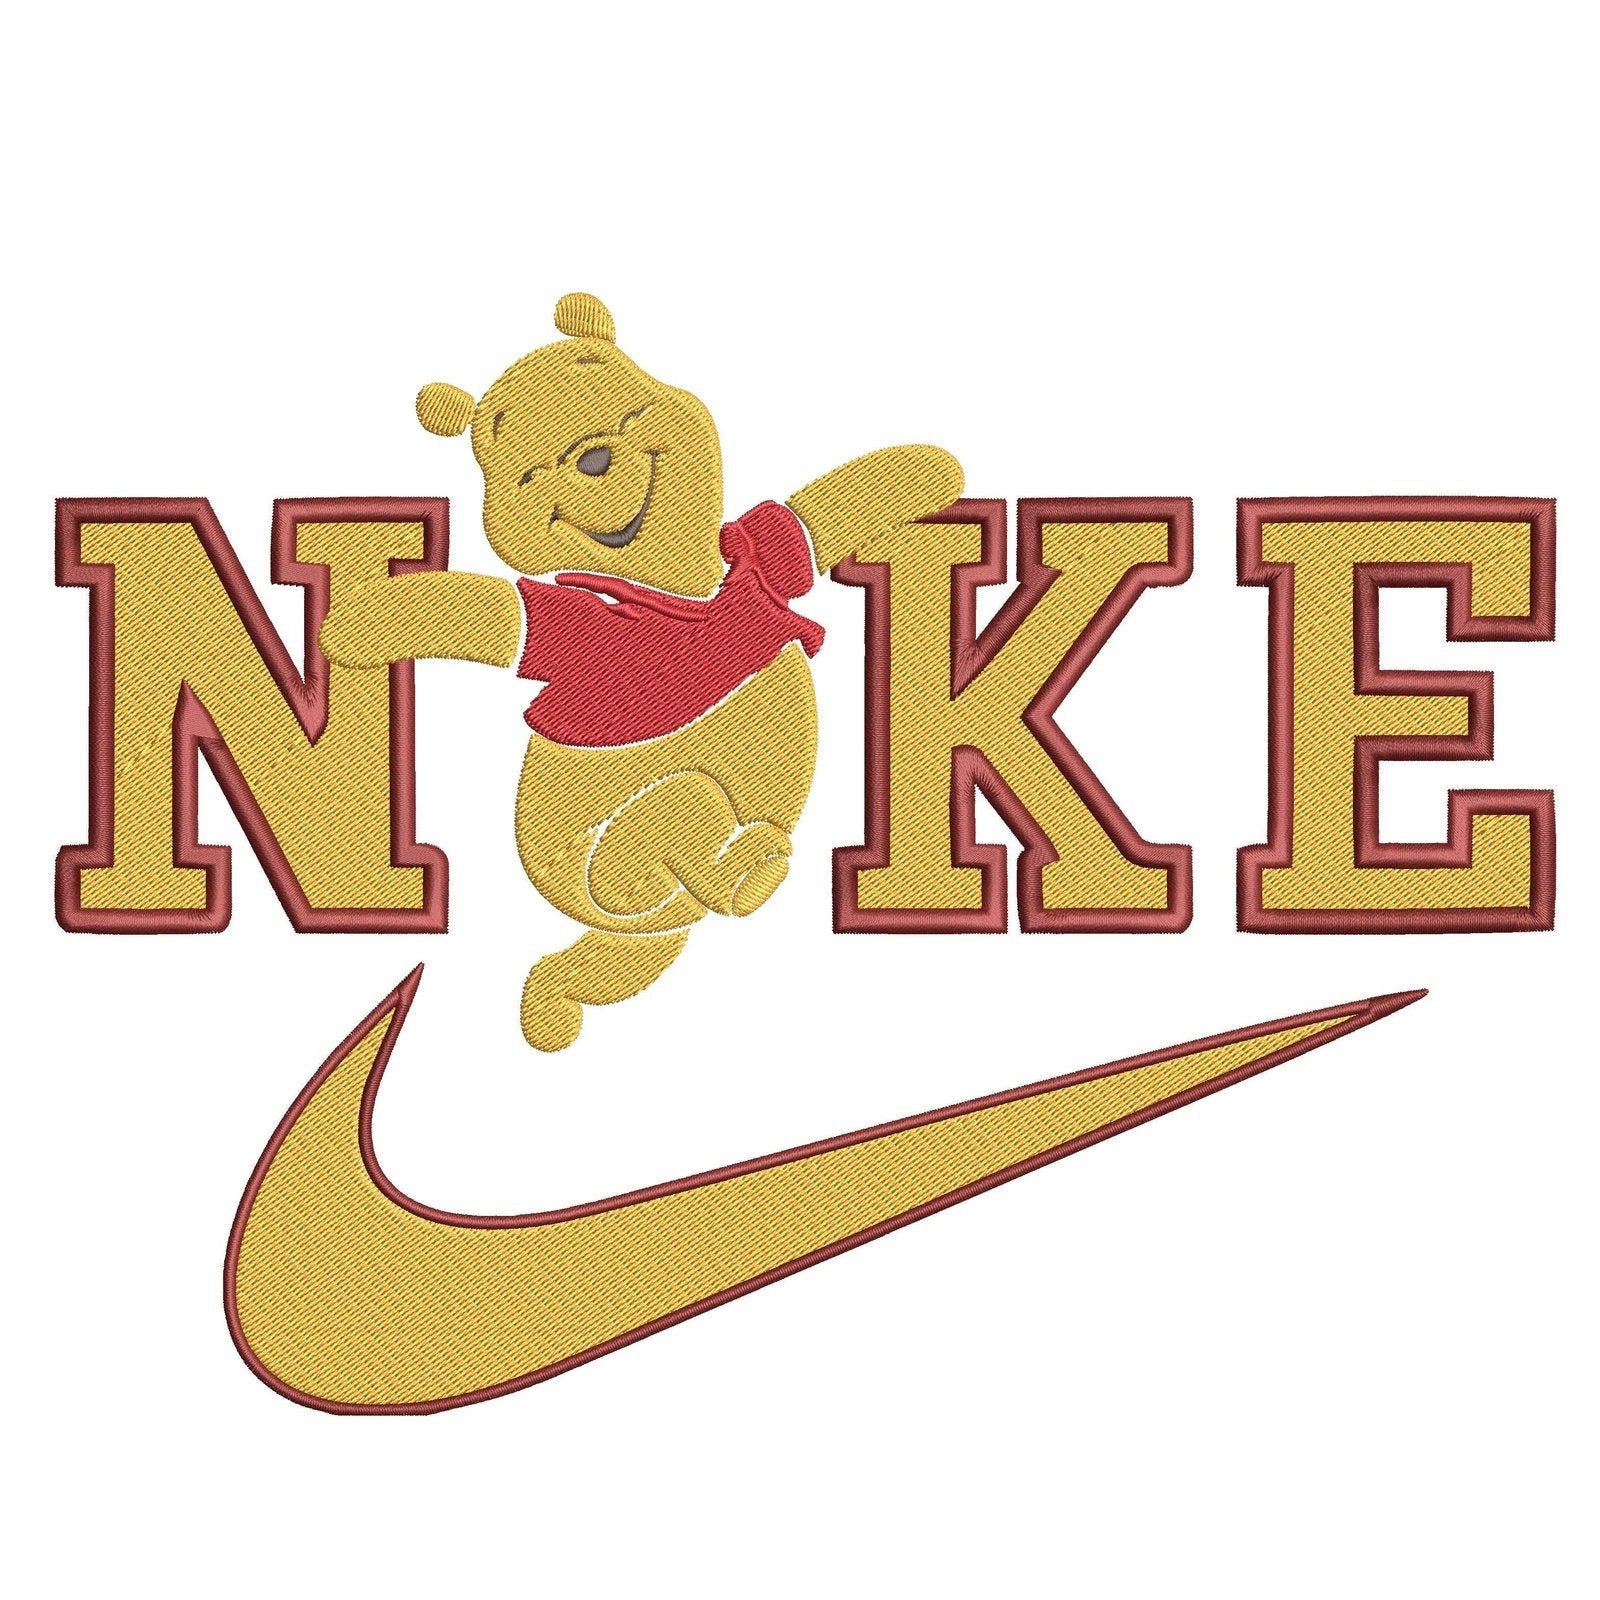 Nike Winnie The Pooh - Bear - Embroidery Design - FineryEmbroidery